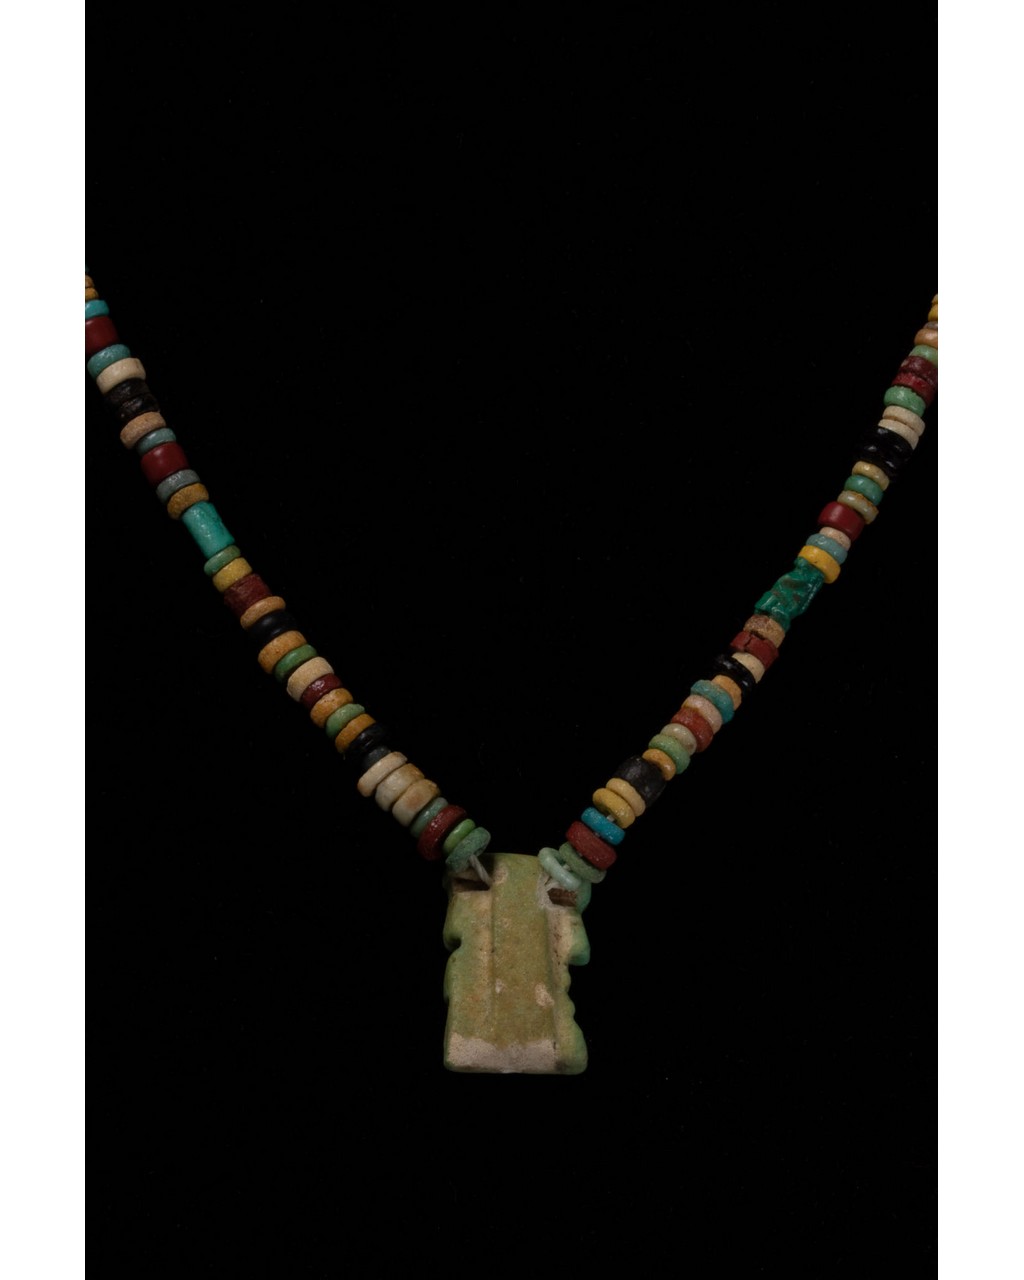 EGYPTIAN BEADED NECKLACE WITH AMULET - Image 5 of 6